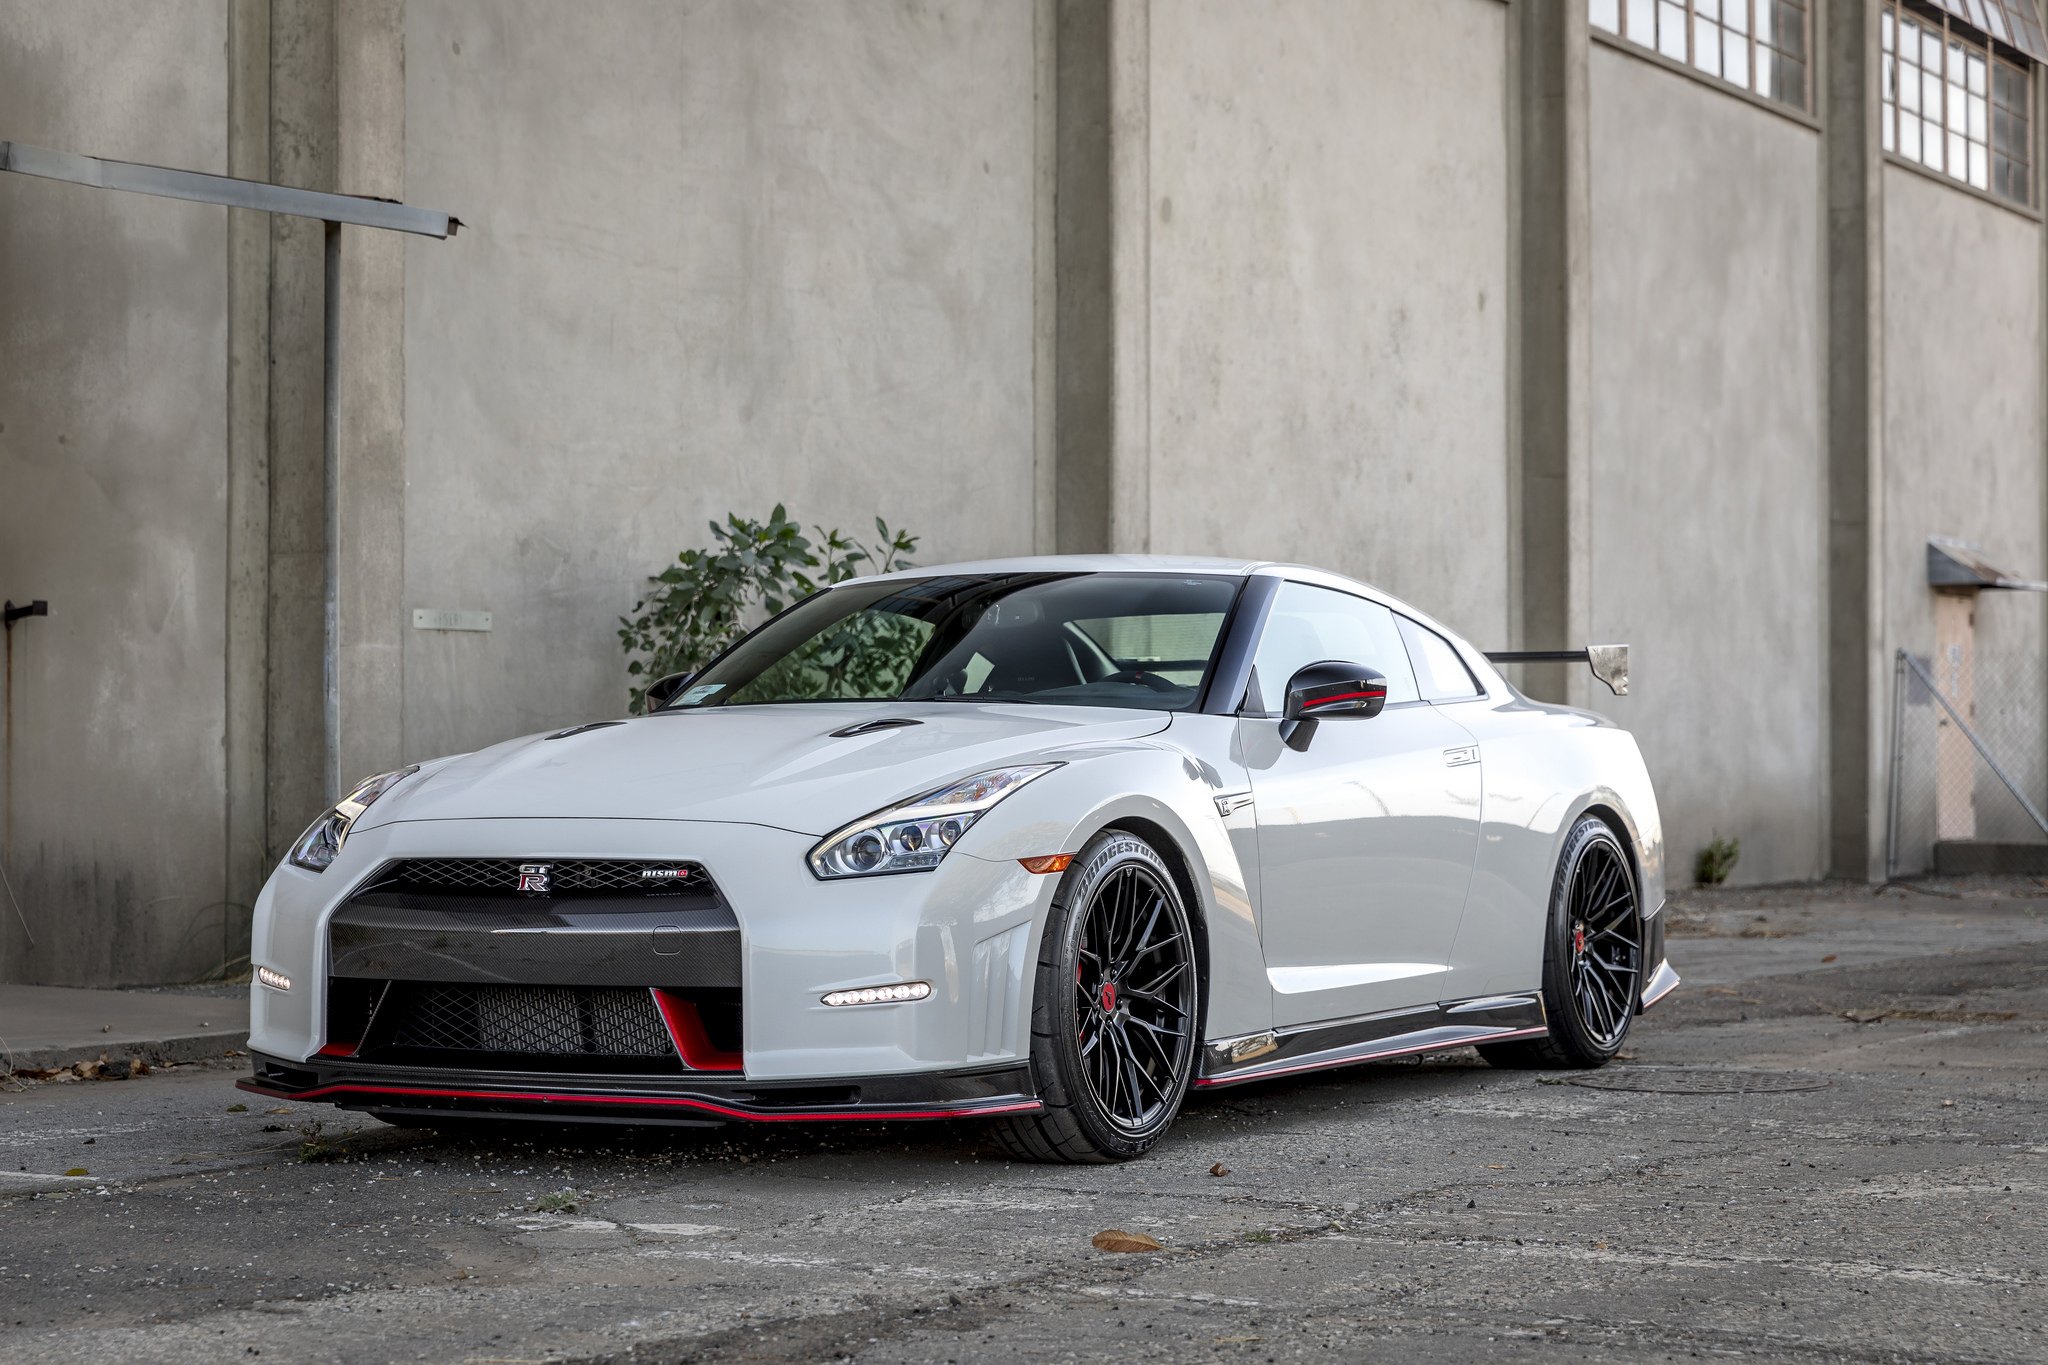 Aftermarket Hood with Air Vents on White Nissan GT-R - Photo by Vorsteiner